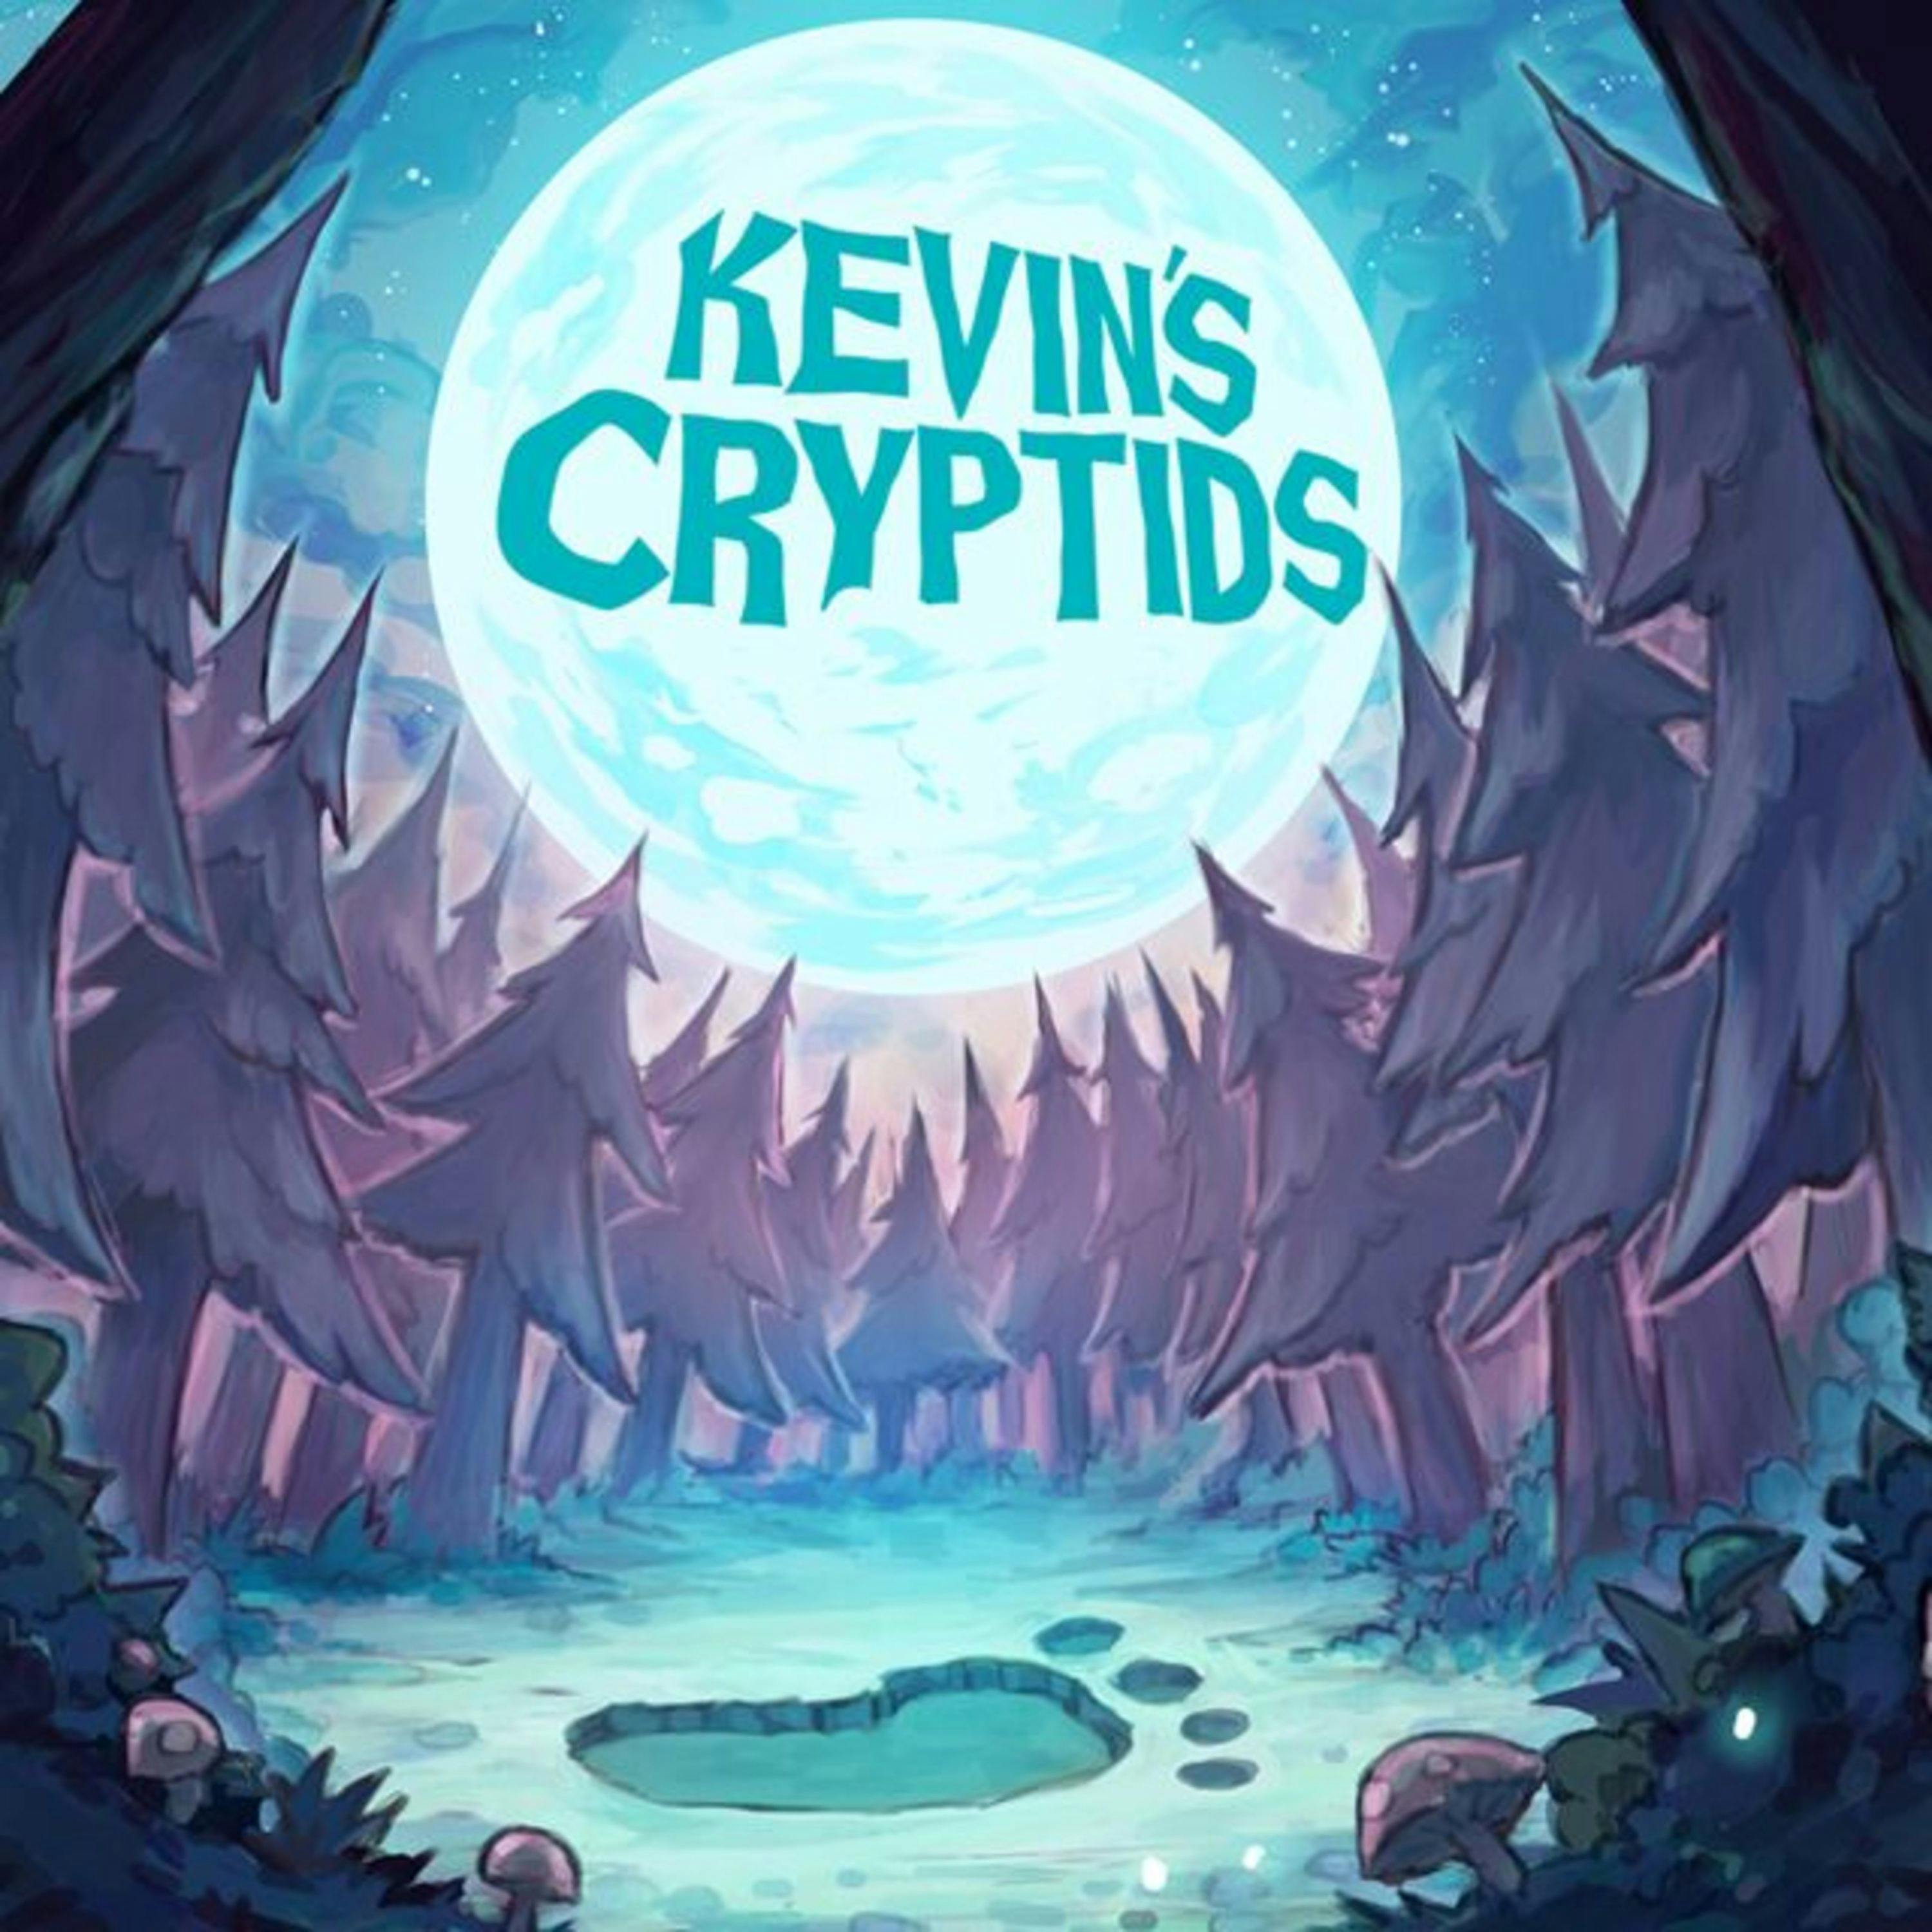 Kevin's Cryptids Season 2 Trailer